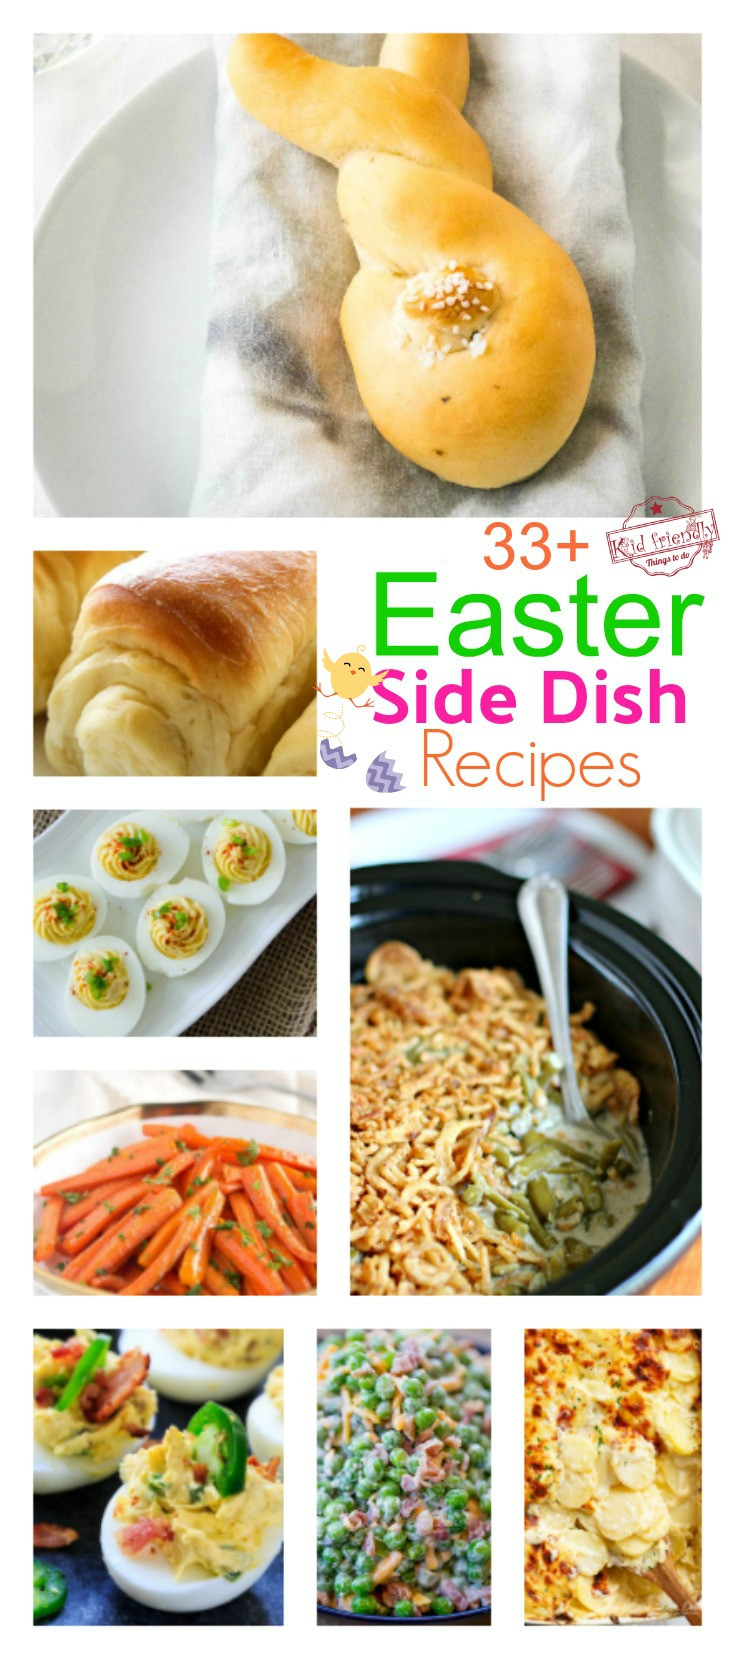 Easy Easter Side Dishes
 Over 33 Easter Side Dish Recipes for Your Celebration Dinner